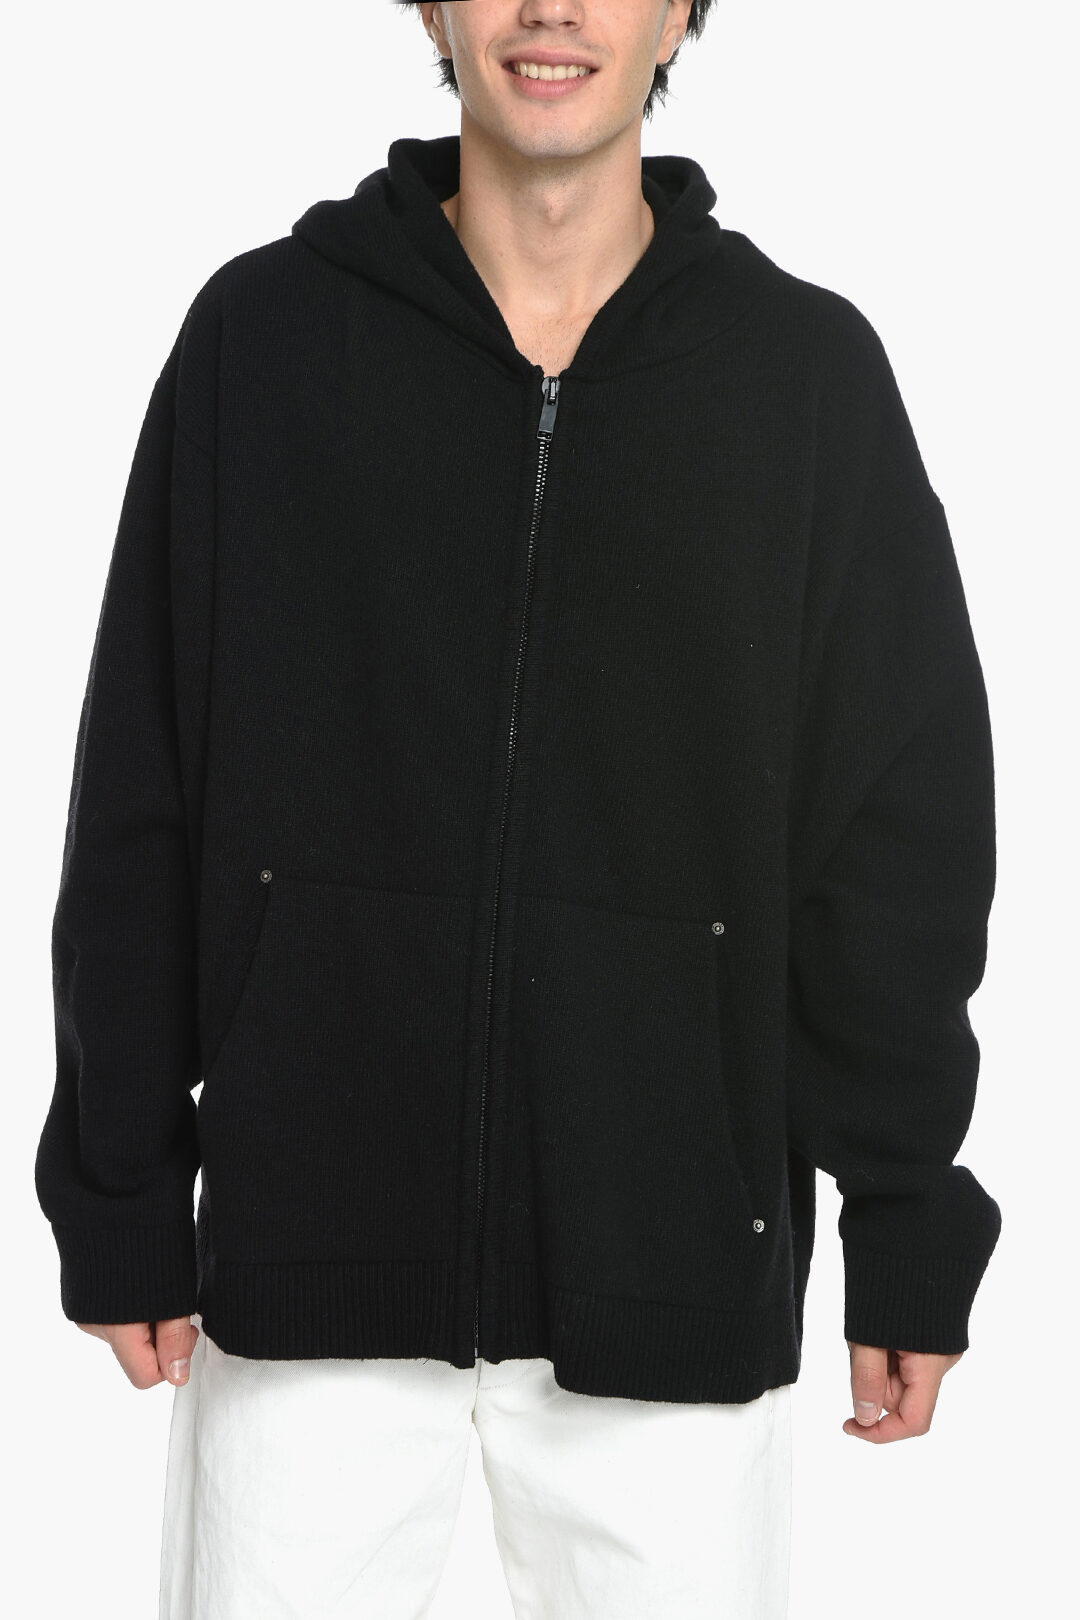 424 Wool Blend Sweater with Hood and Zip men - Glamood Outlet